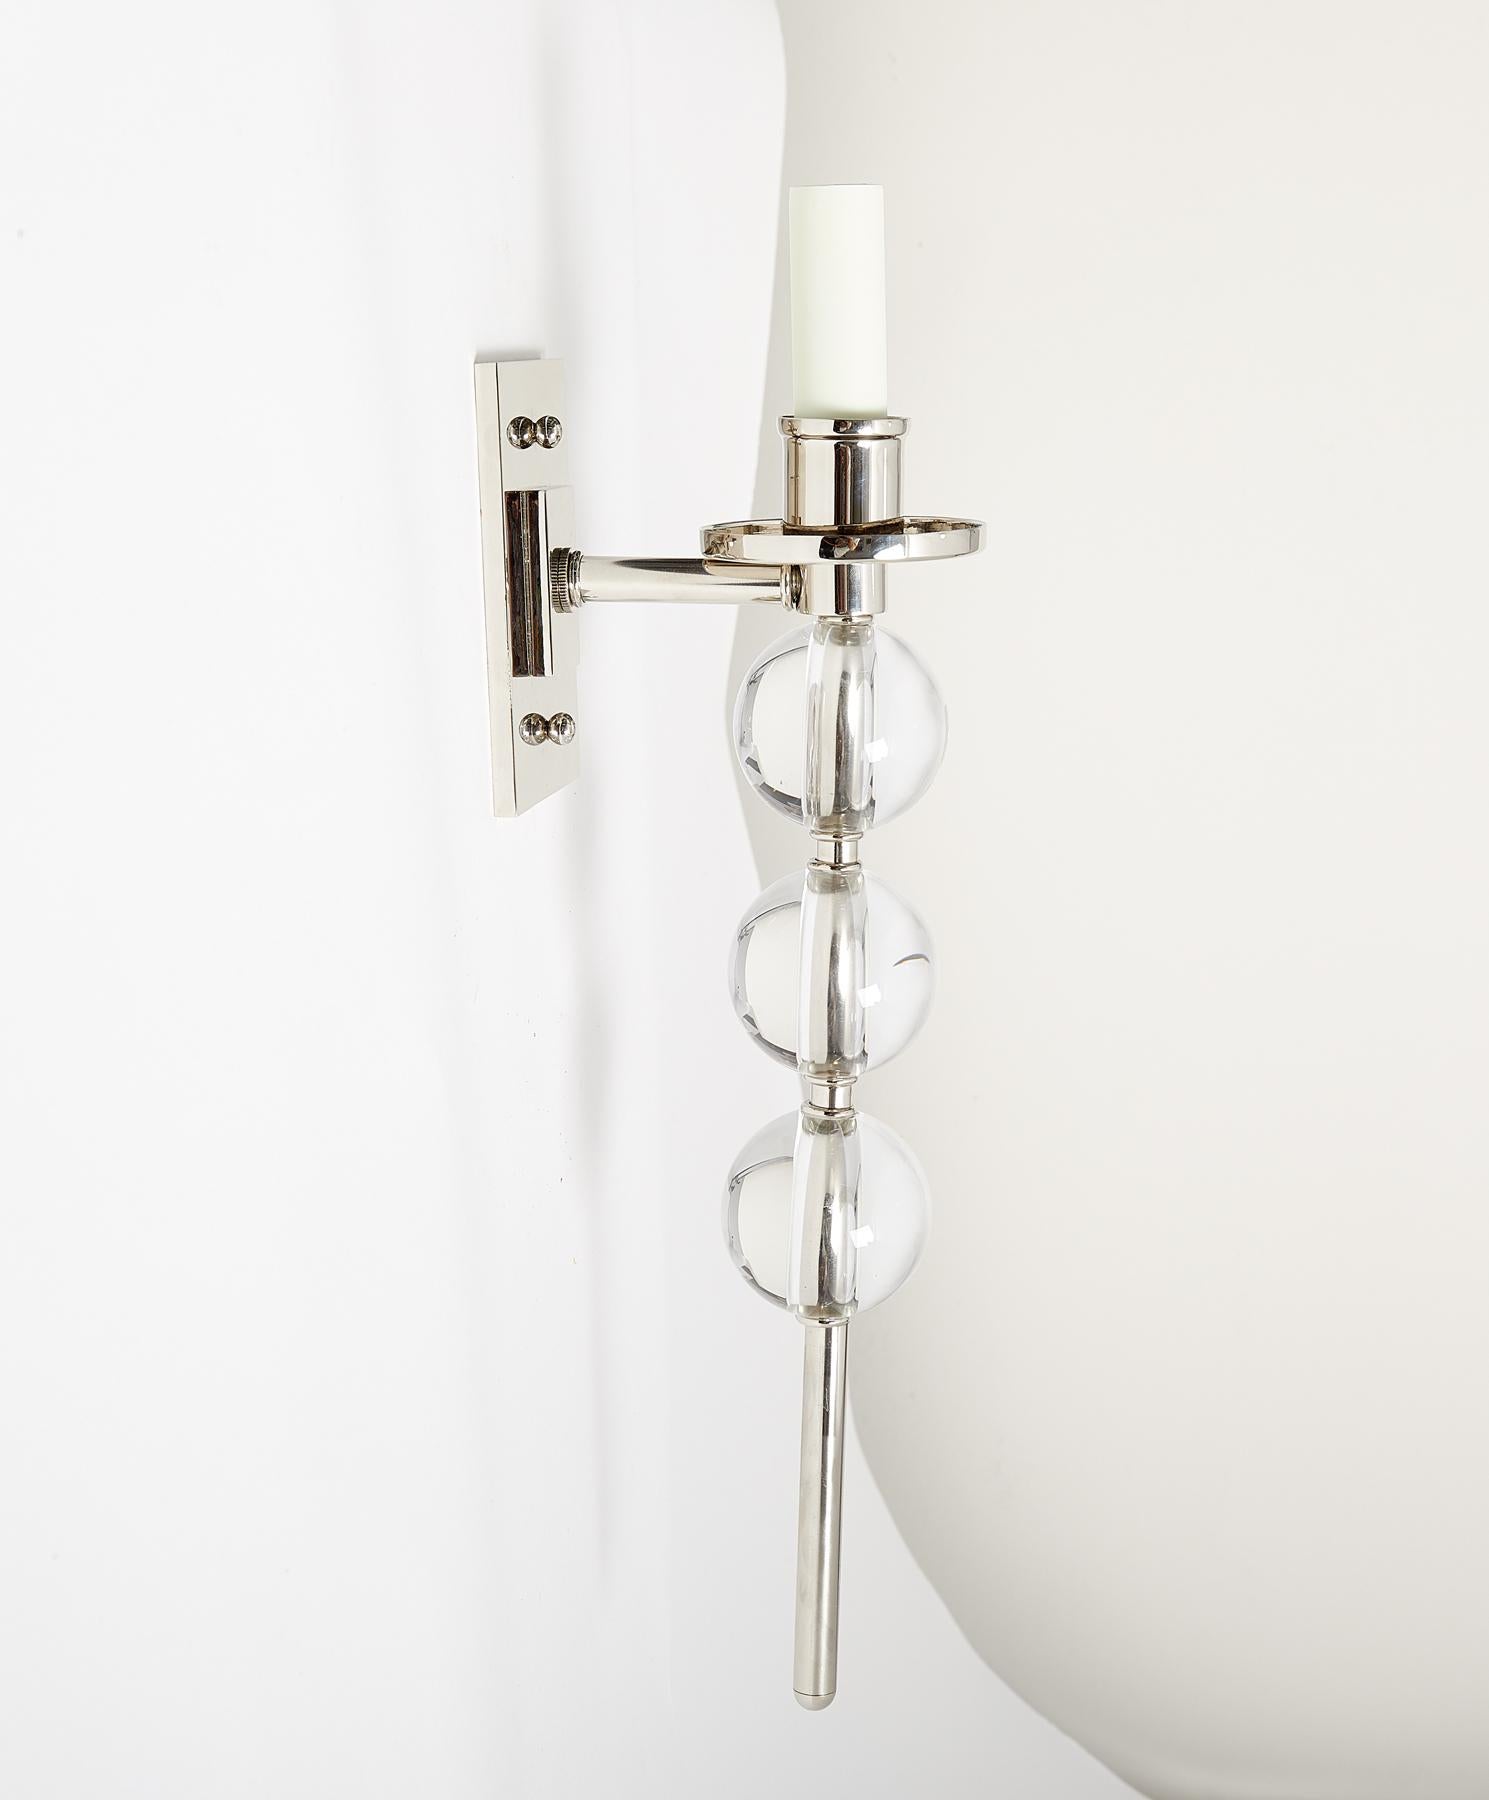 A pair of our custom-designed Ephorus sconces with over-scaled Murano glass balls, polished nickel finish, rectangular backplates, and elongated center rod. Also available in brass, and with rock crystal balls. One candelabra socket per